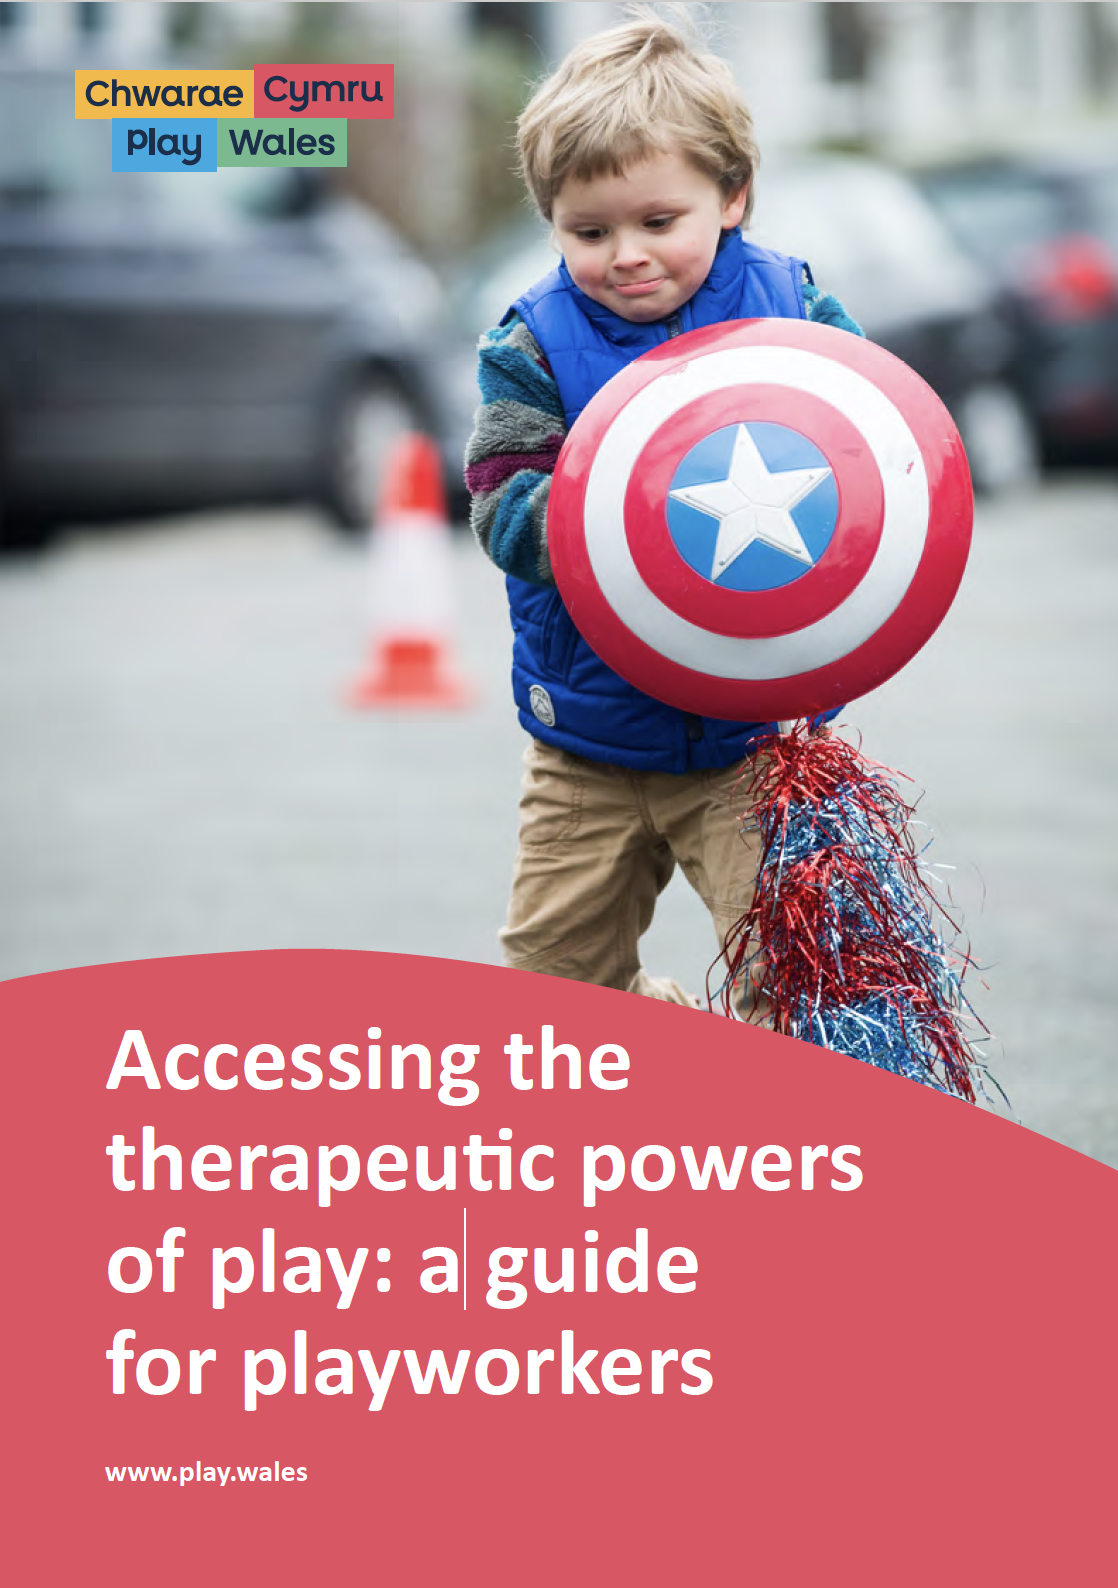 Accessing the therapeutic powers of play: a guide for playworkers